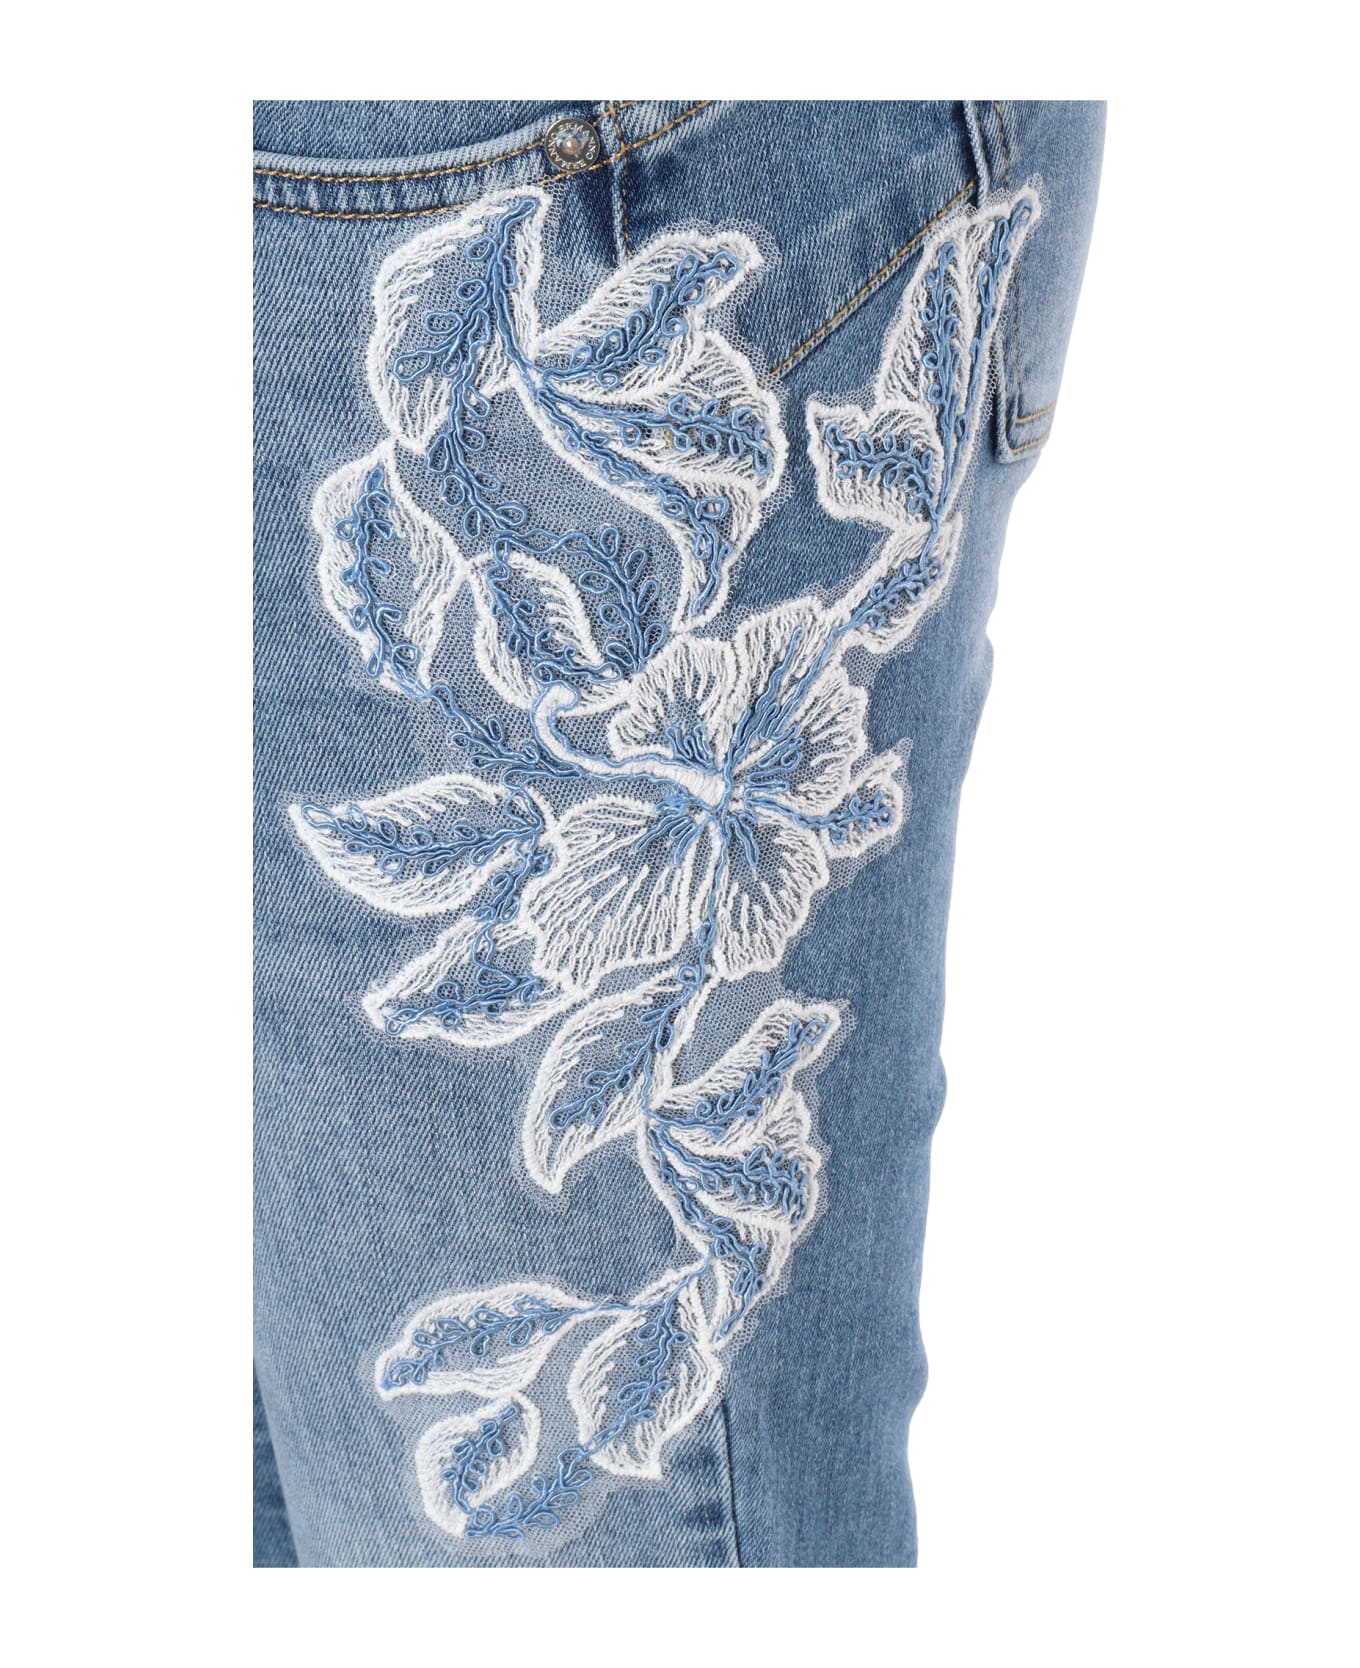 Ermanno Ermanno Scervino Jeans With Lace - BLUE